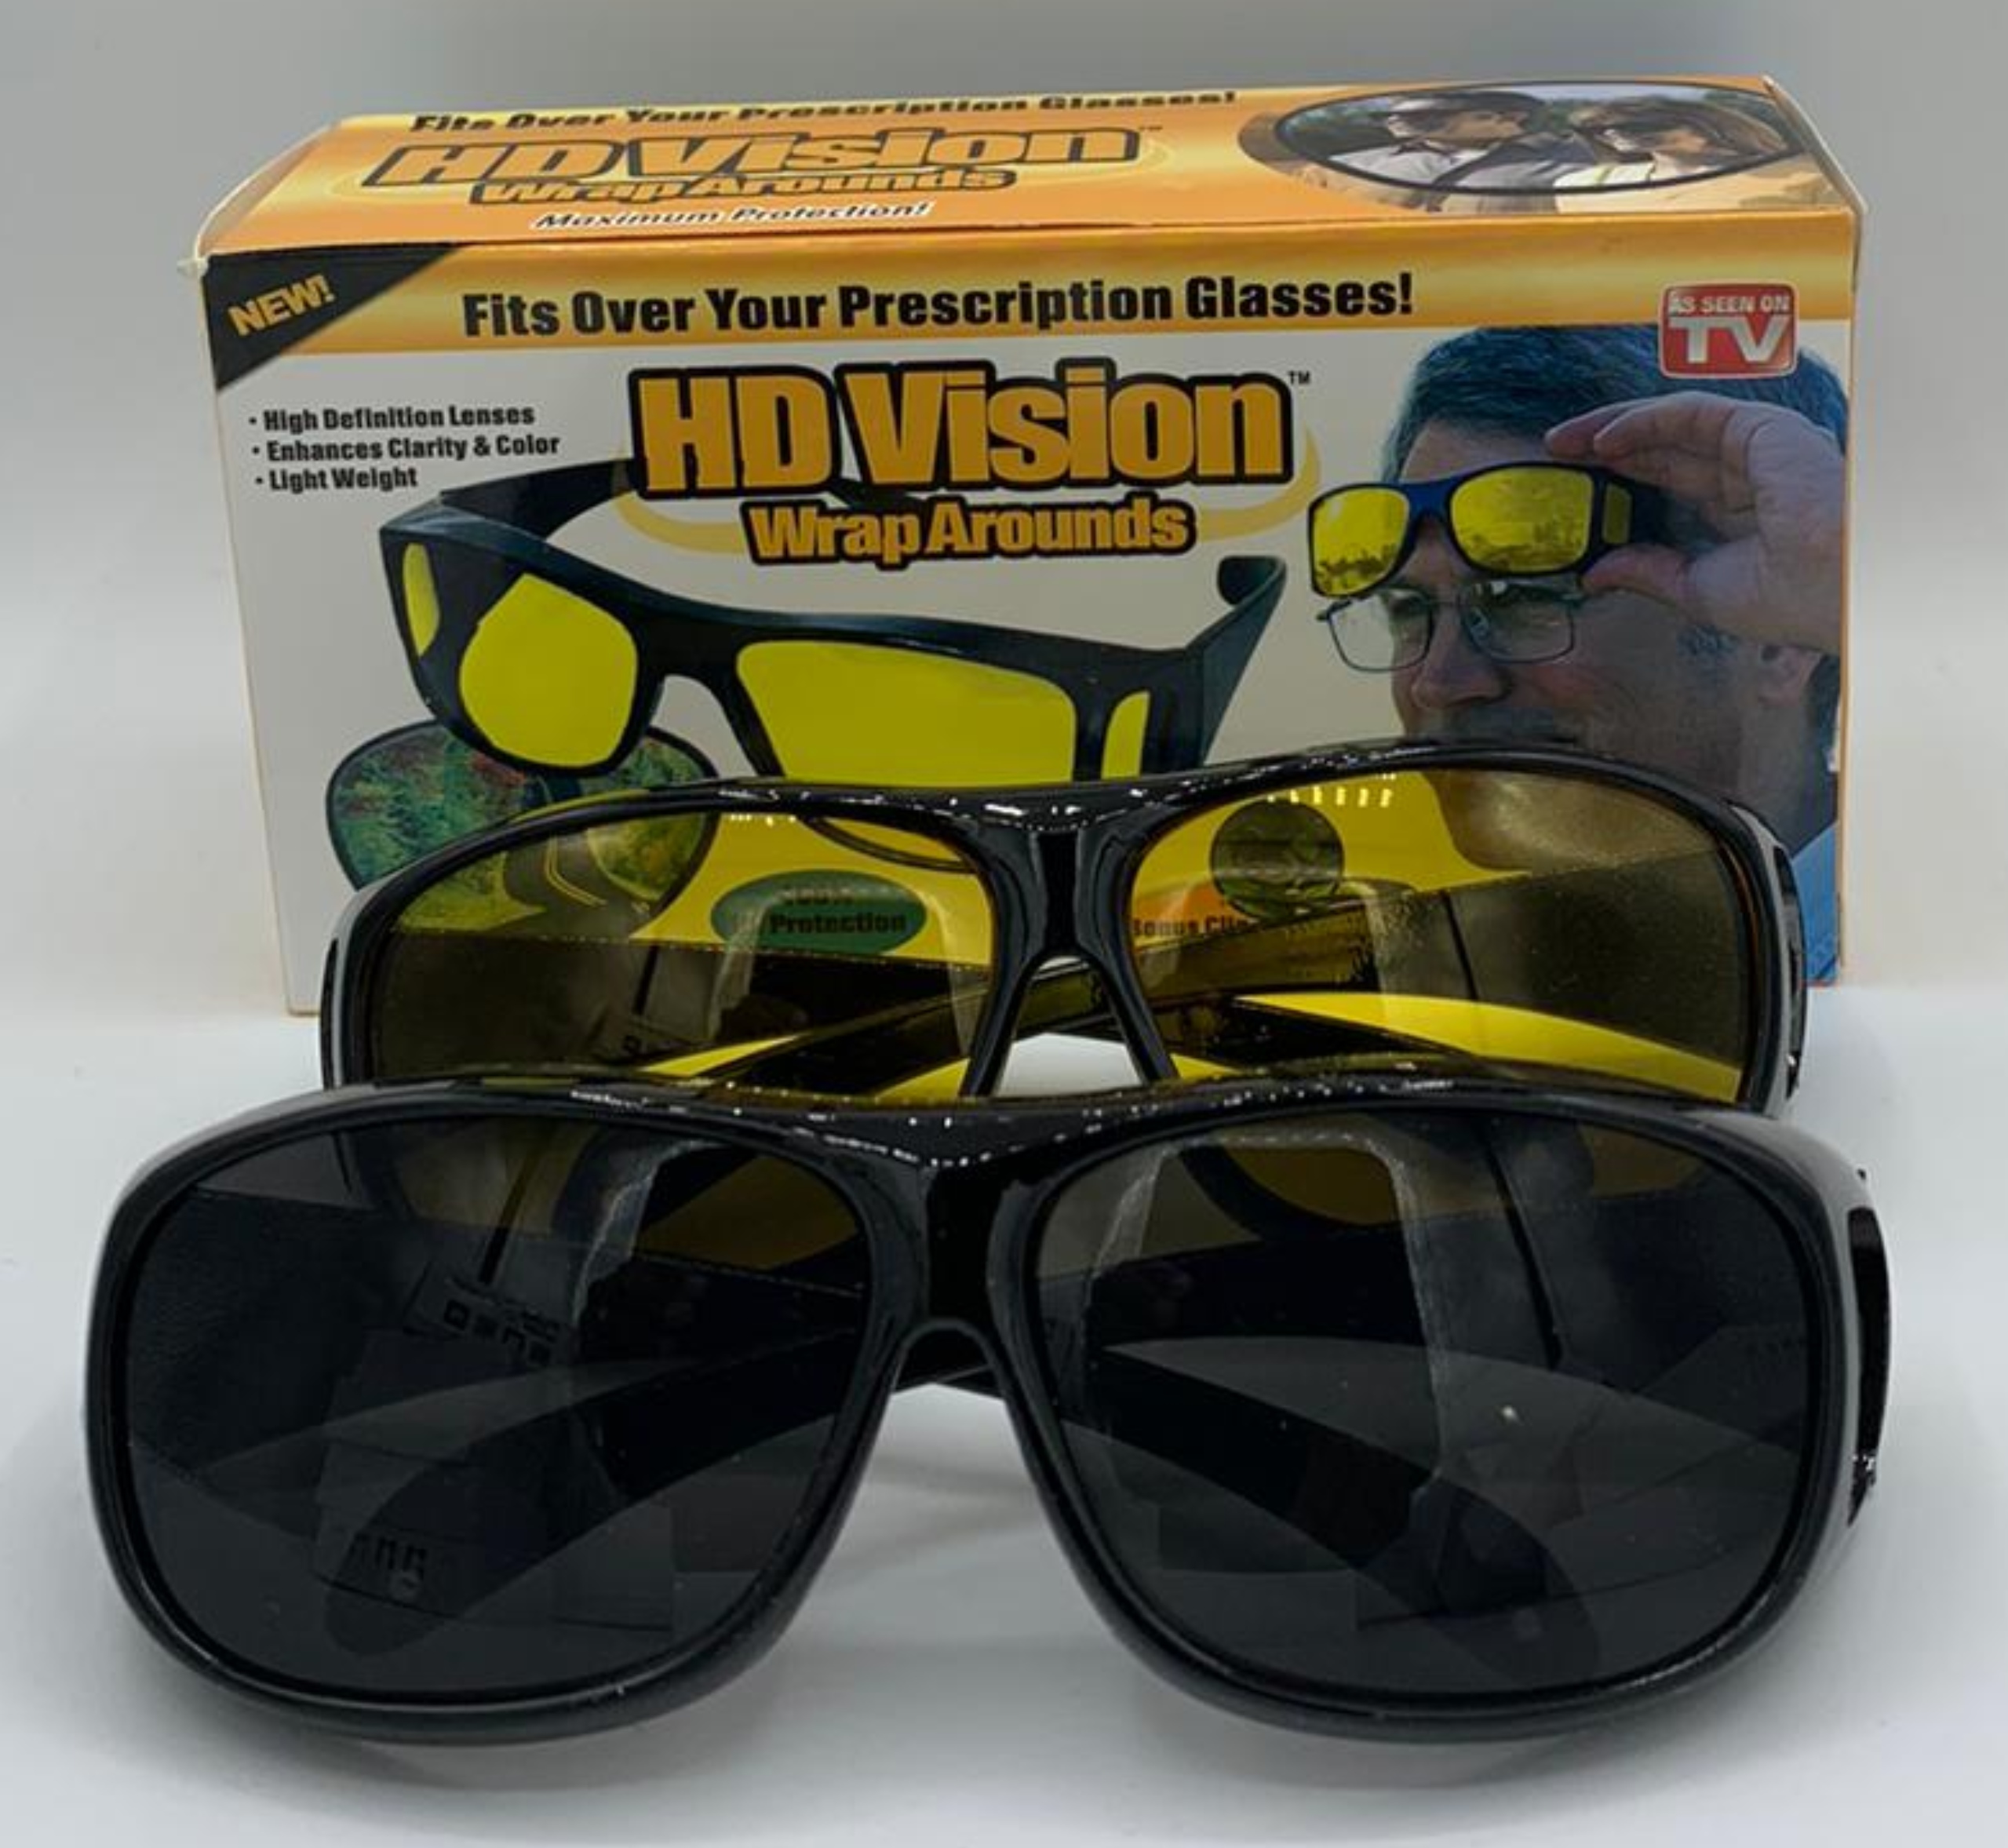 HD Night & Day Vision Wraparound Sunglasses, As Seen on TV, Fits over Glasses Bonus Pair Included - image 4 of 6